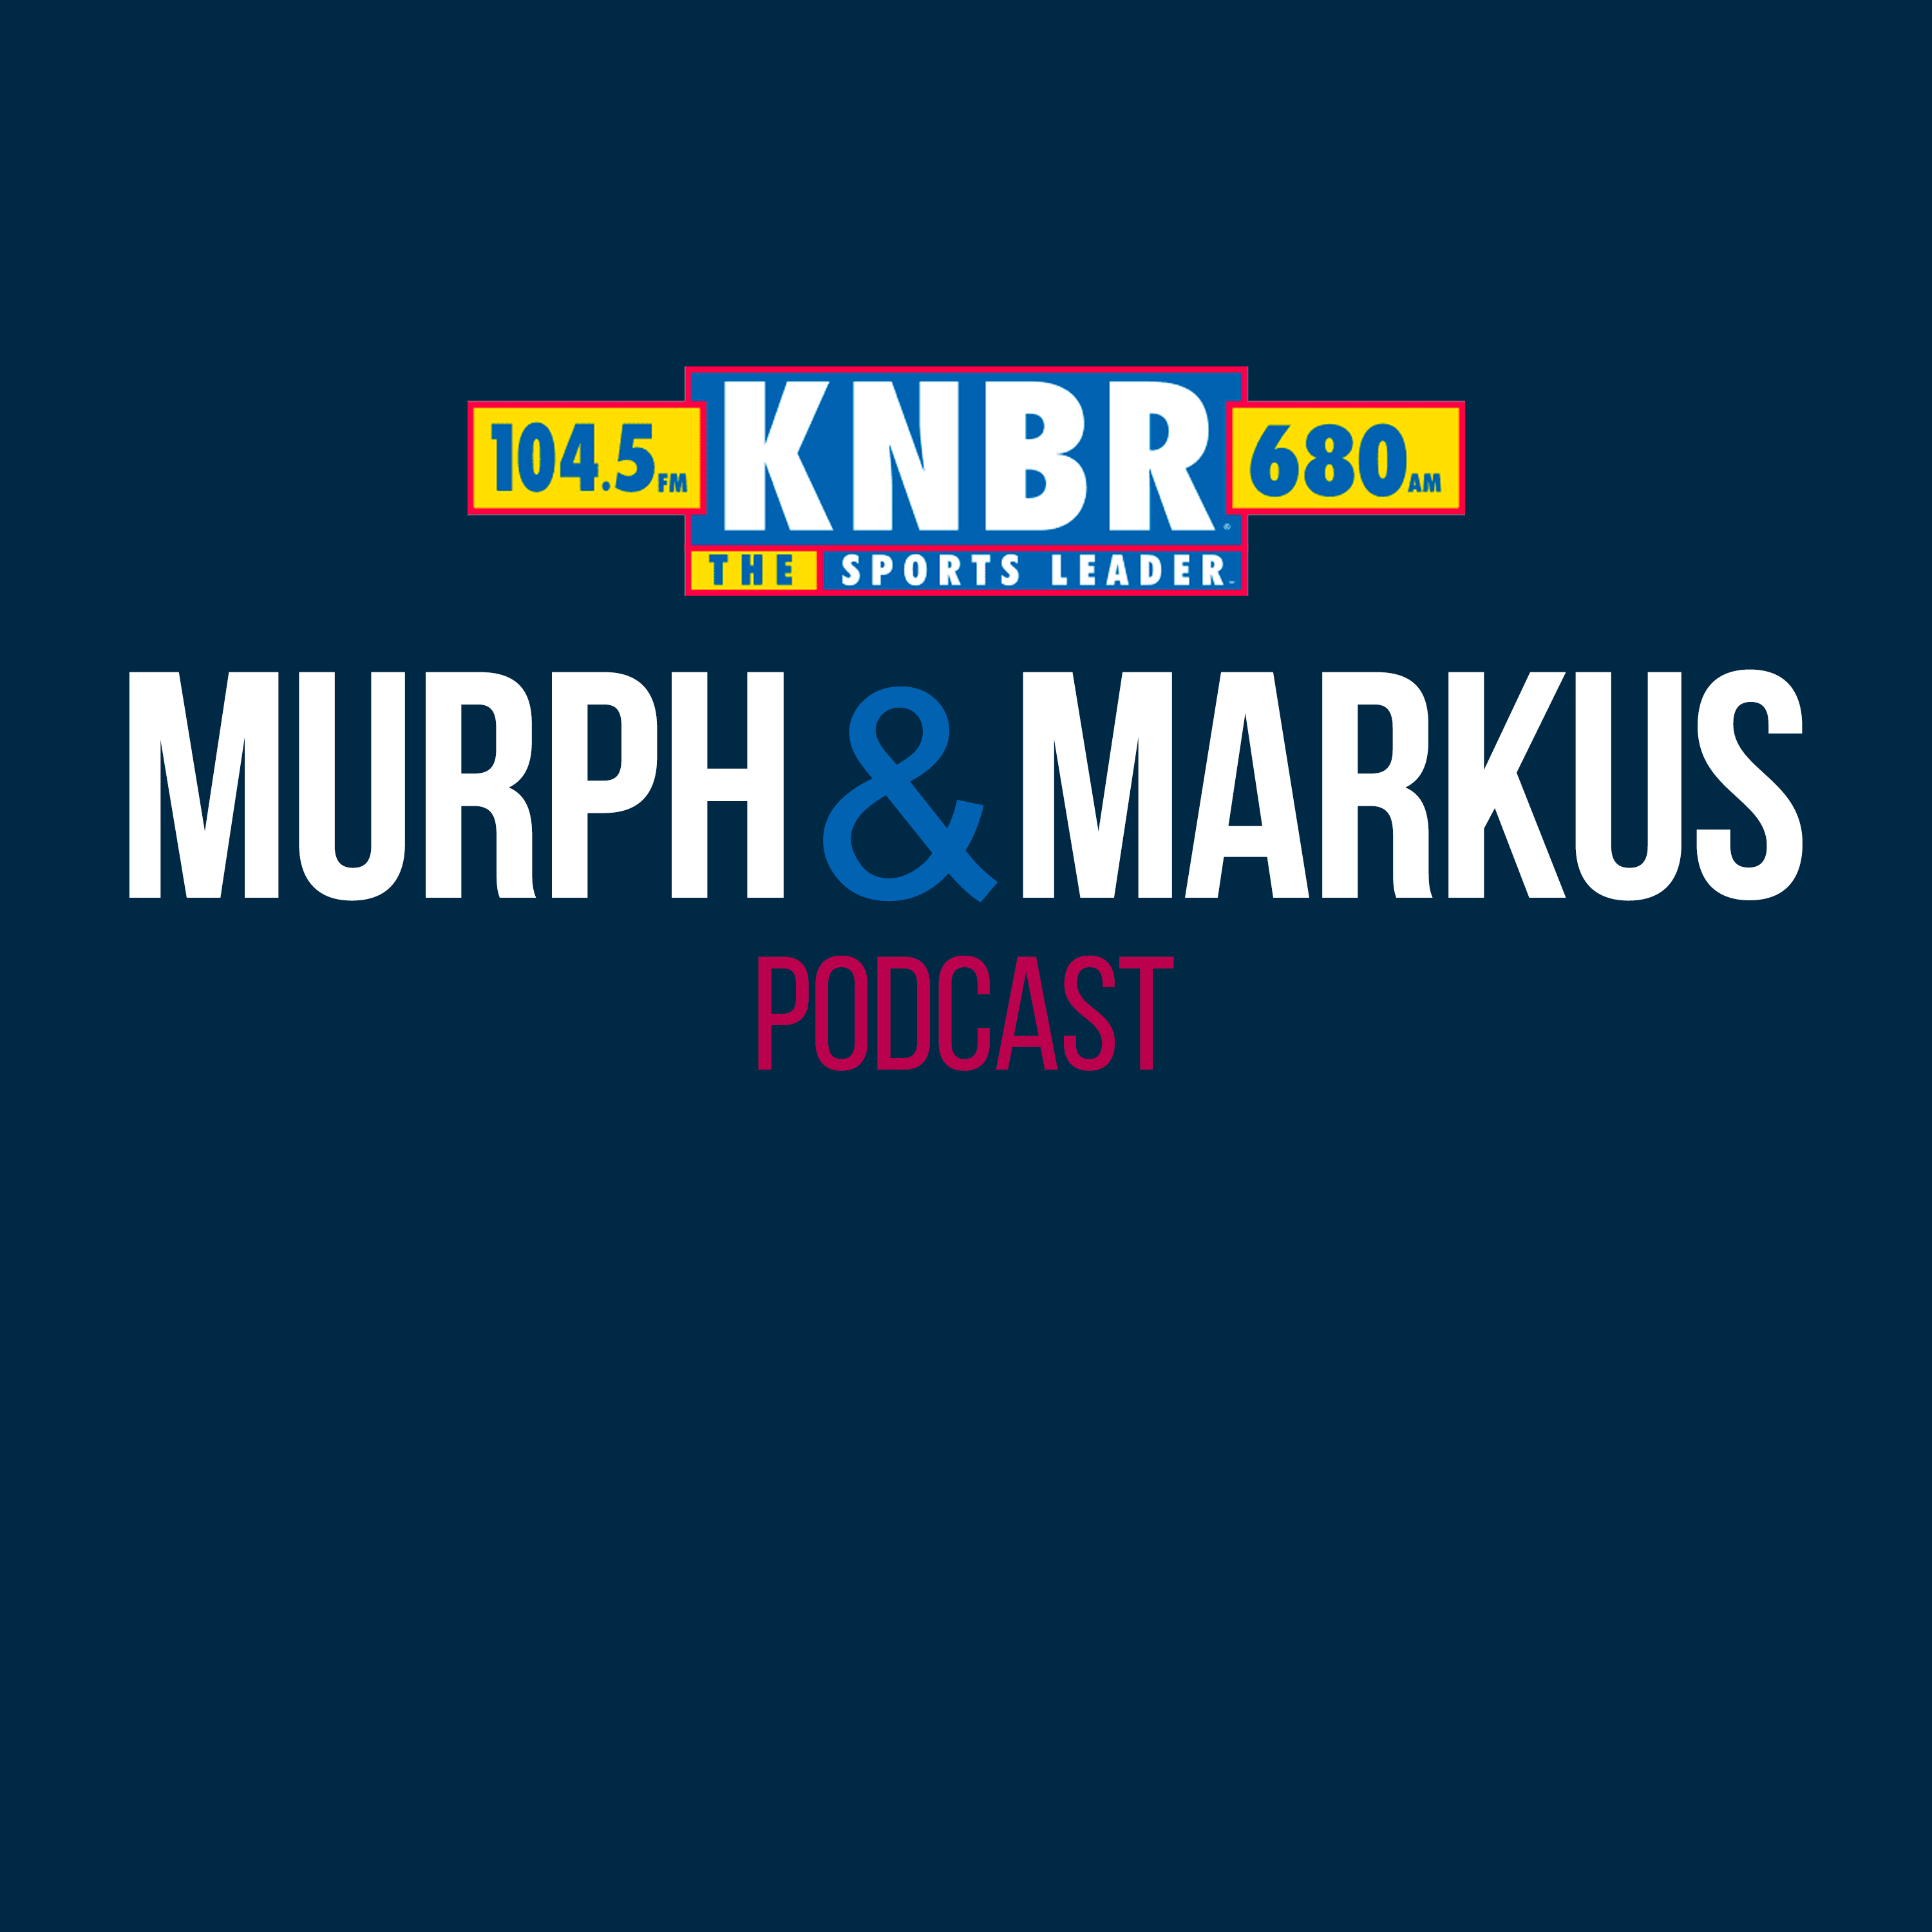 5-15 Hour 3: Murph & Markus continue to take calls from fans on what went wrong for the Giants, dive into the Cooler of Content, and talk to Donte Whitner